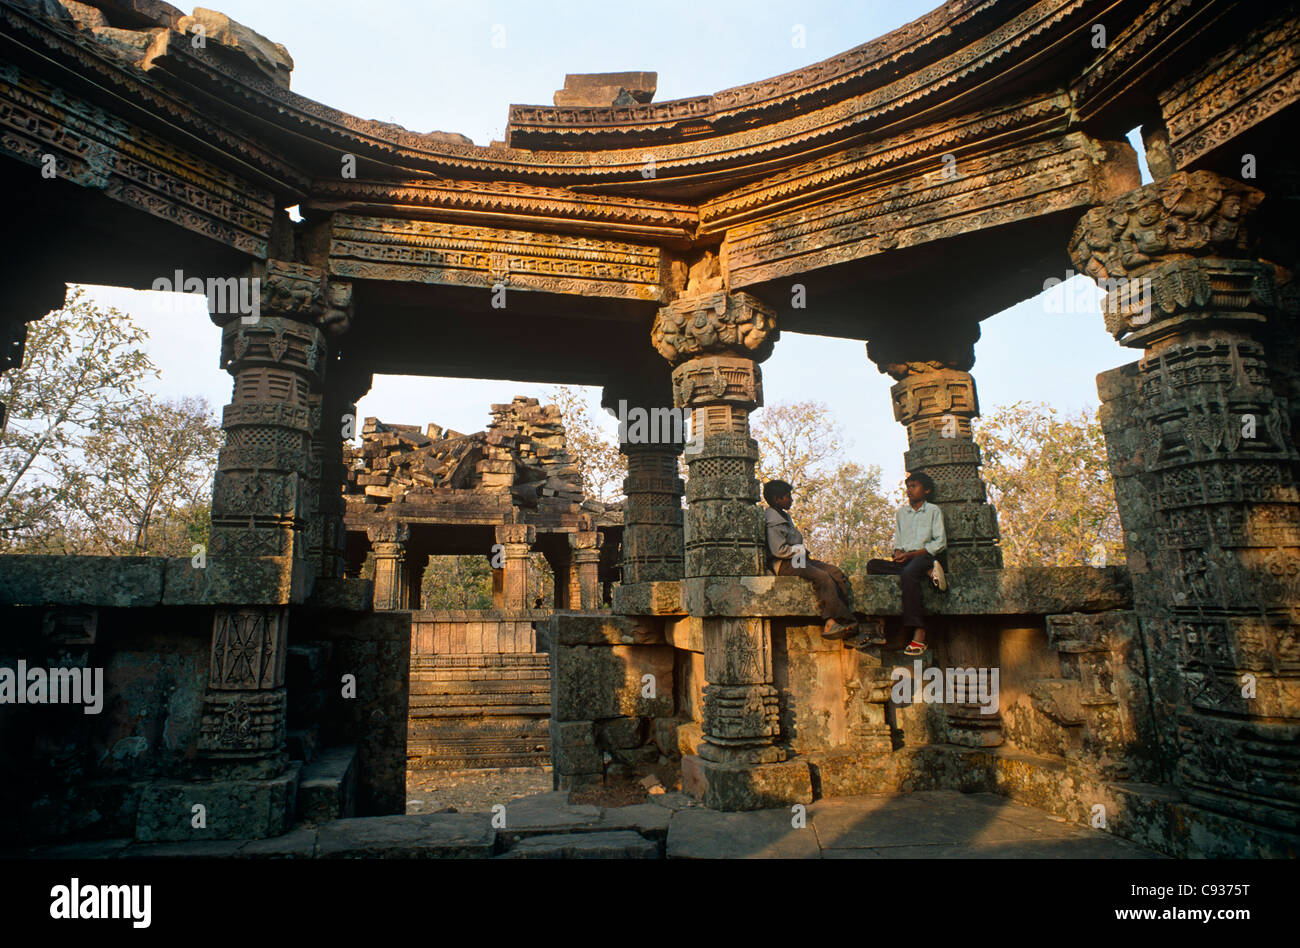 India, Madhya Pradesh, Ajaigarh. Young boys rest in the ruins of an ancient Hindu temple. Stock Photo